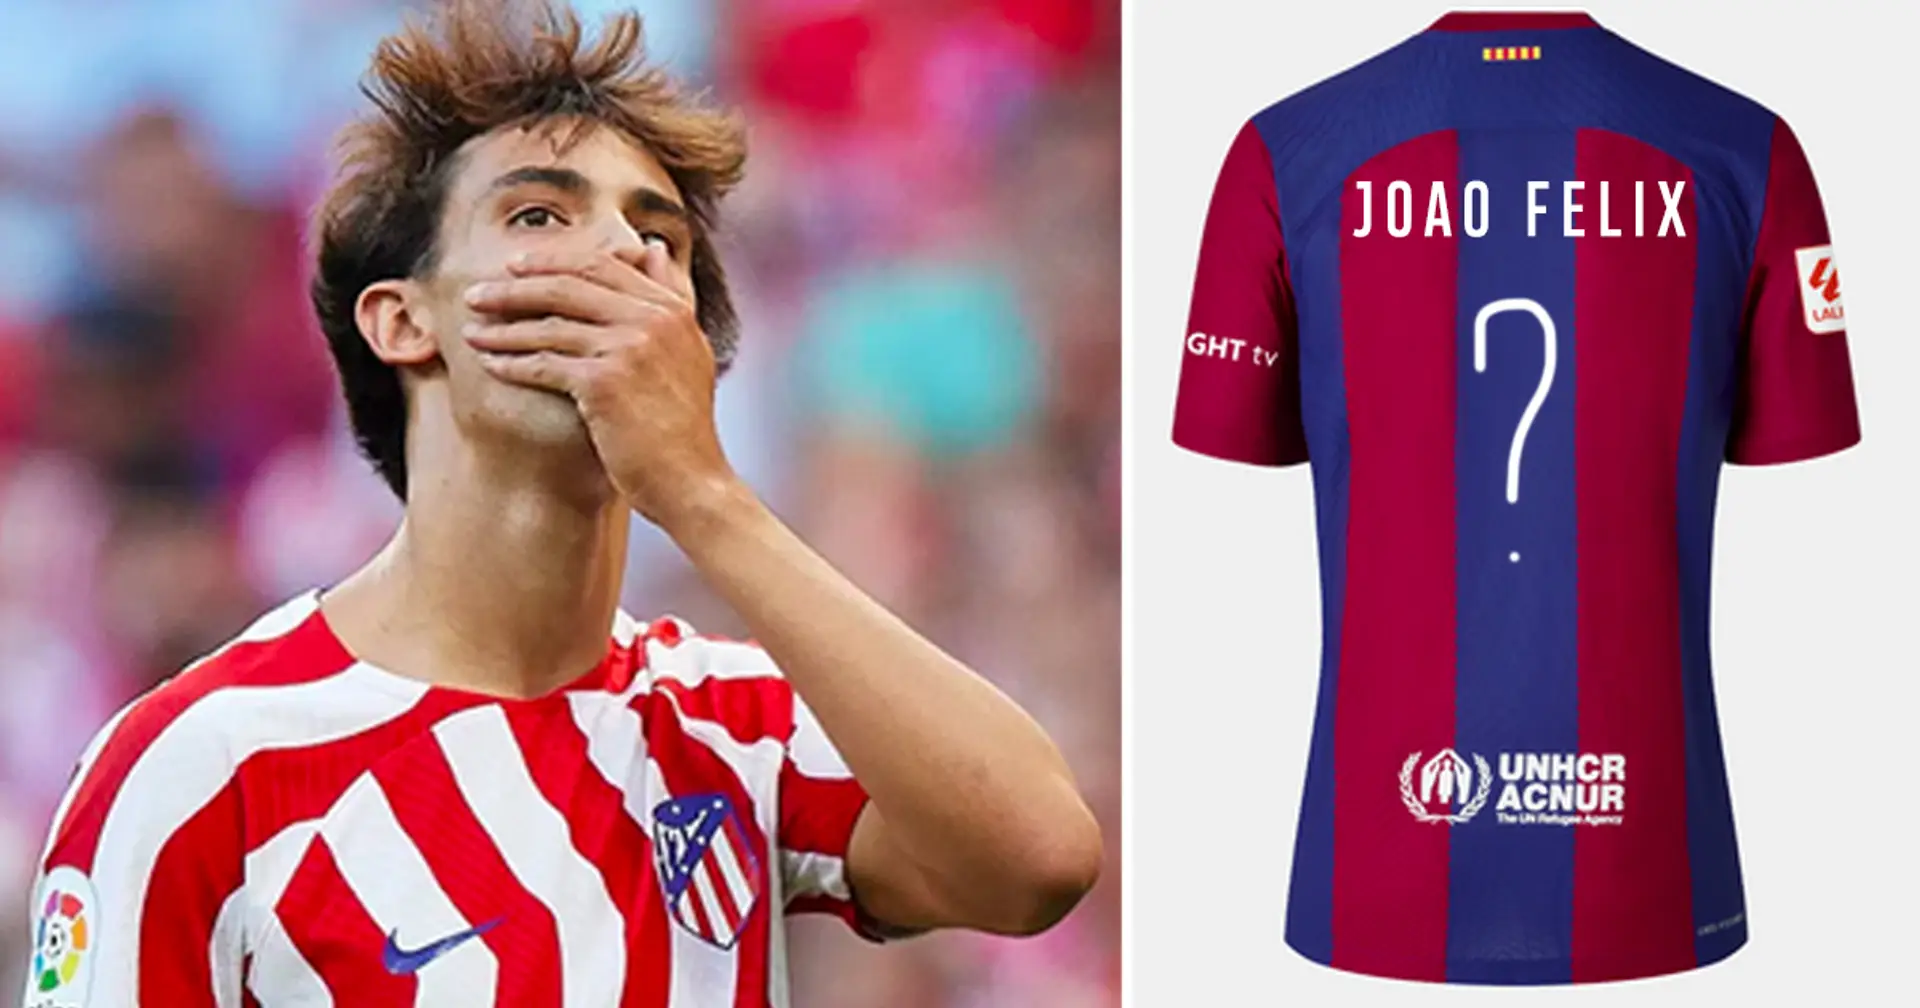 One very special jersey Joao Felix could get at Barca